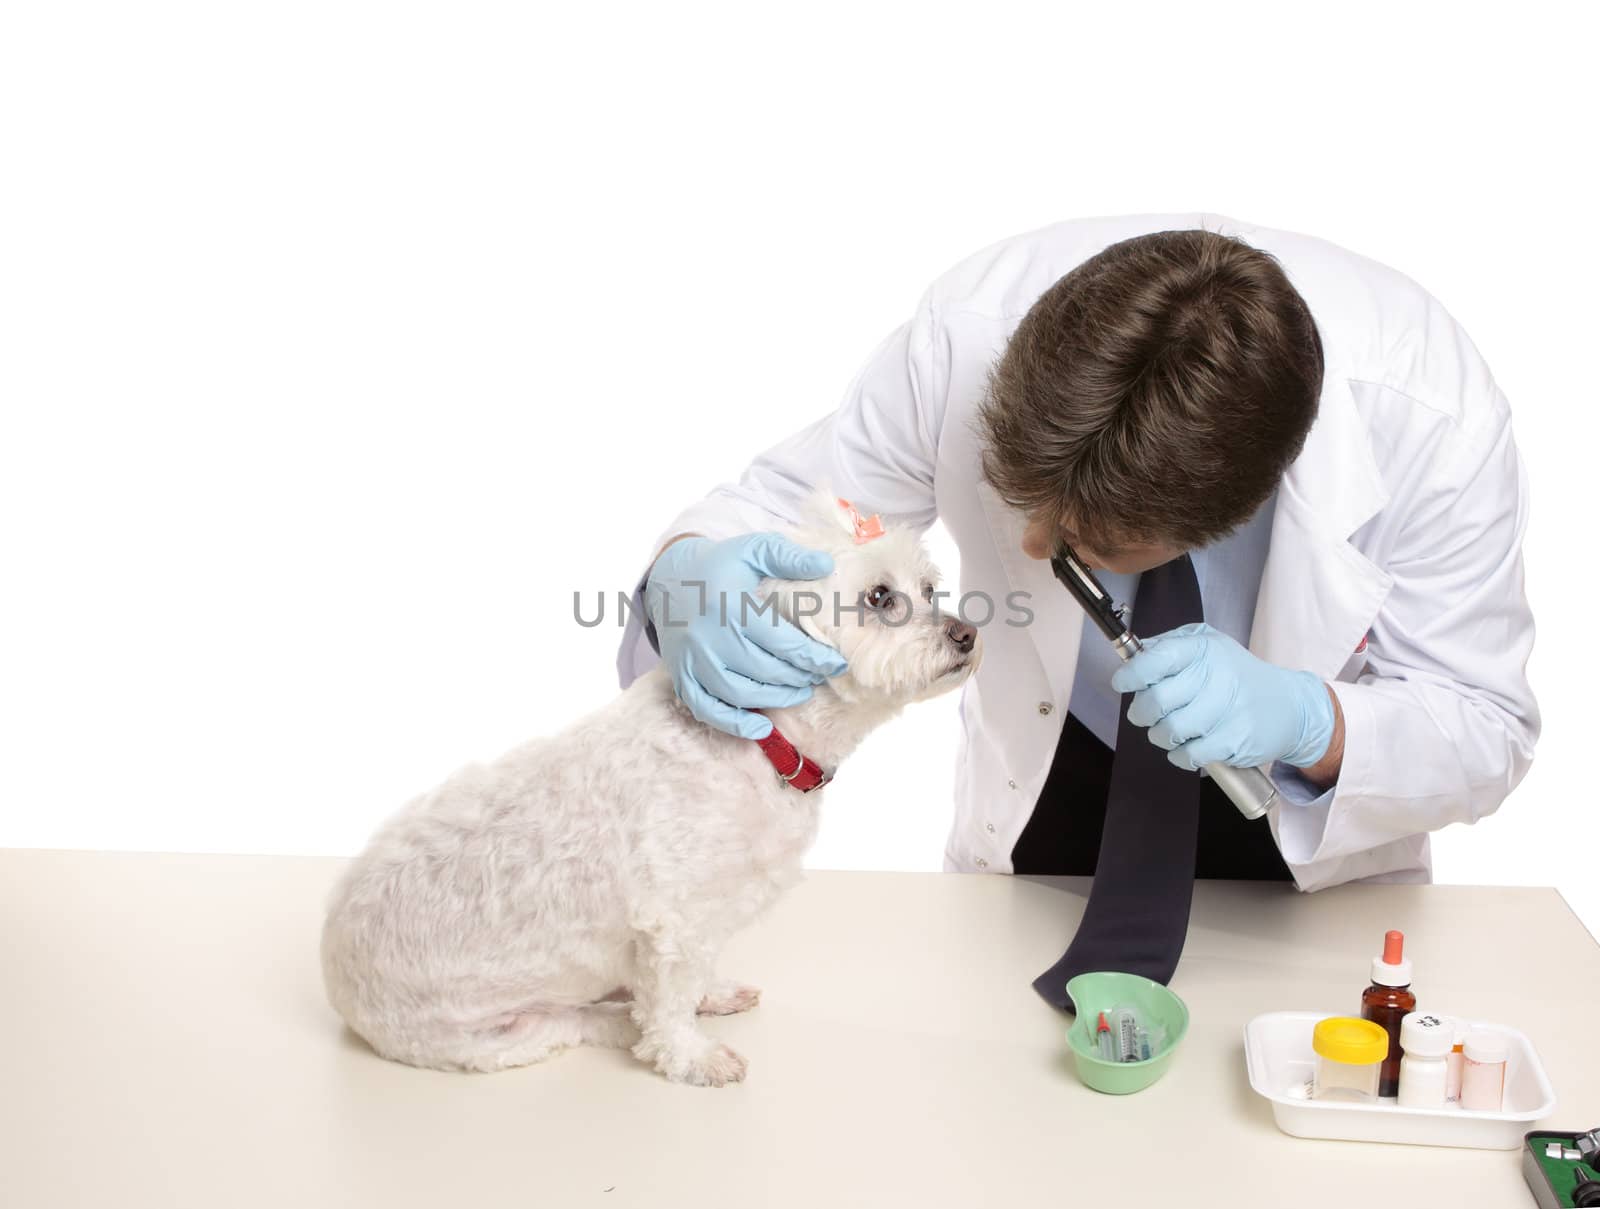 A maltese terrier receives a checkup at a veterinary clinic.